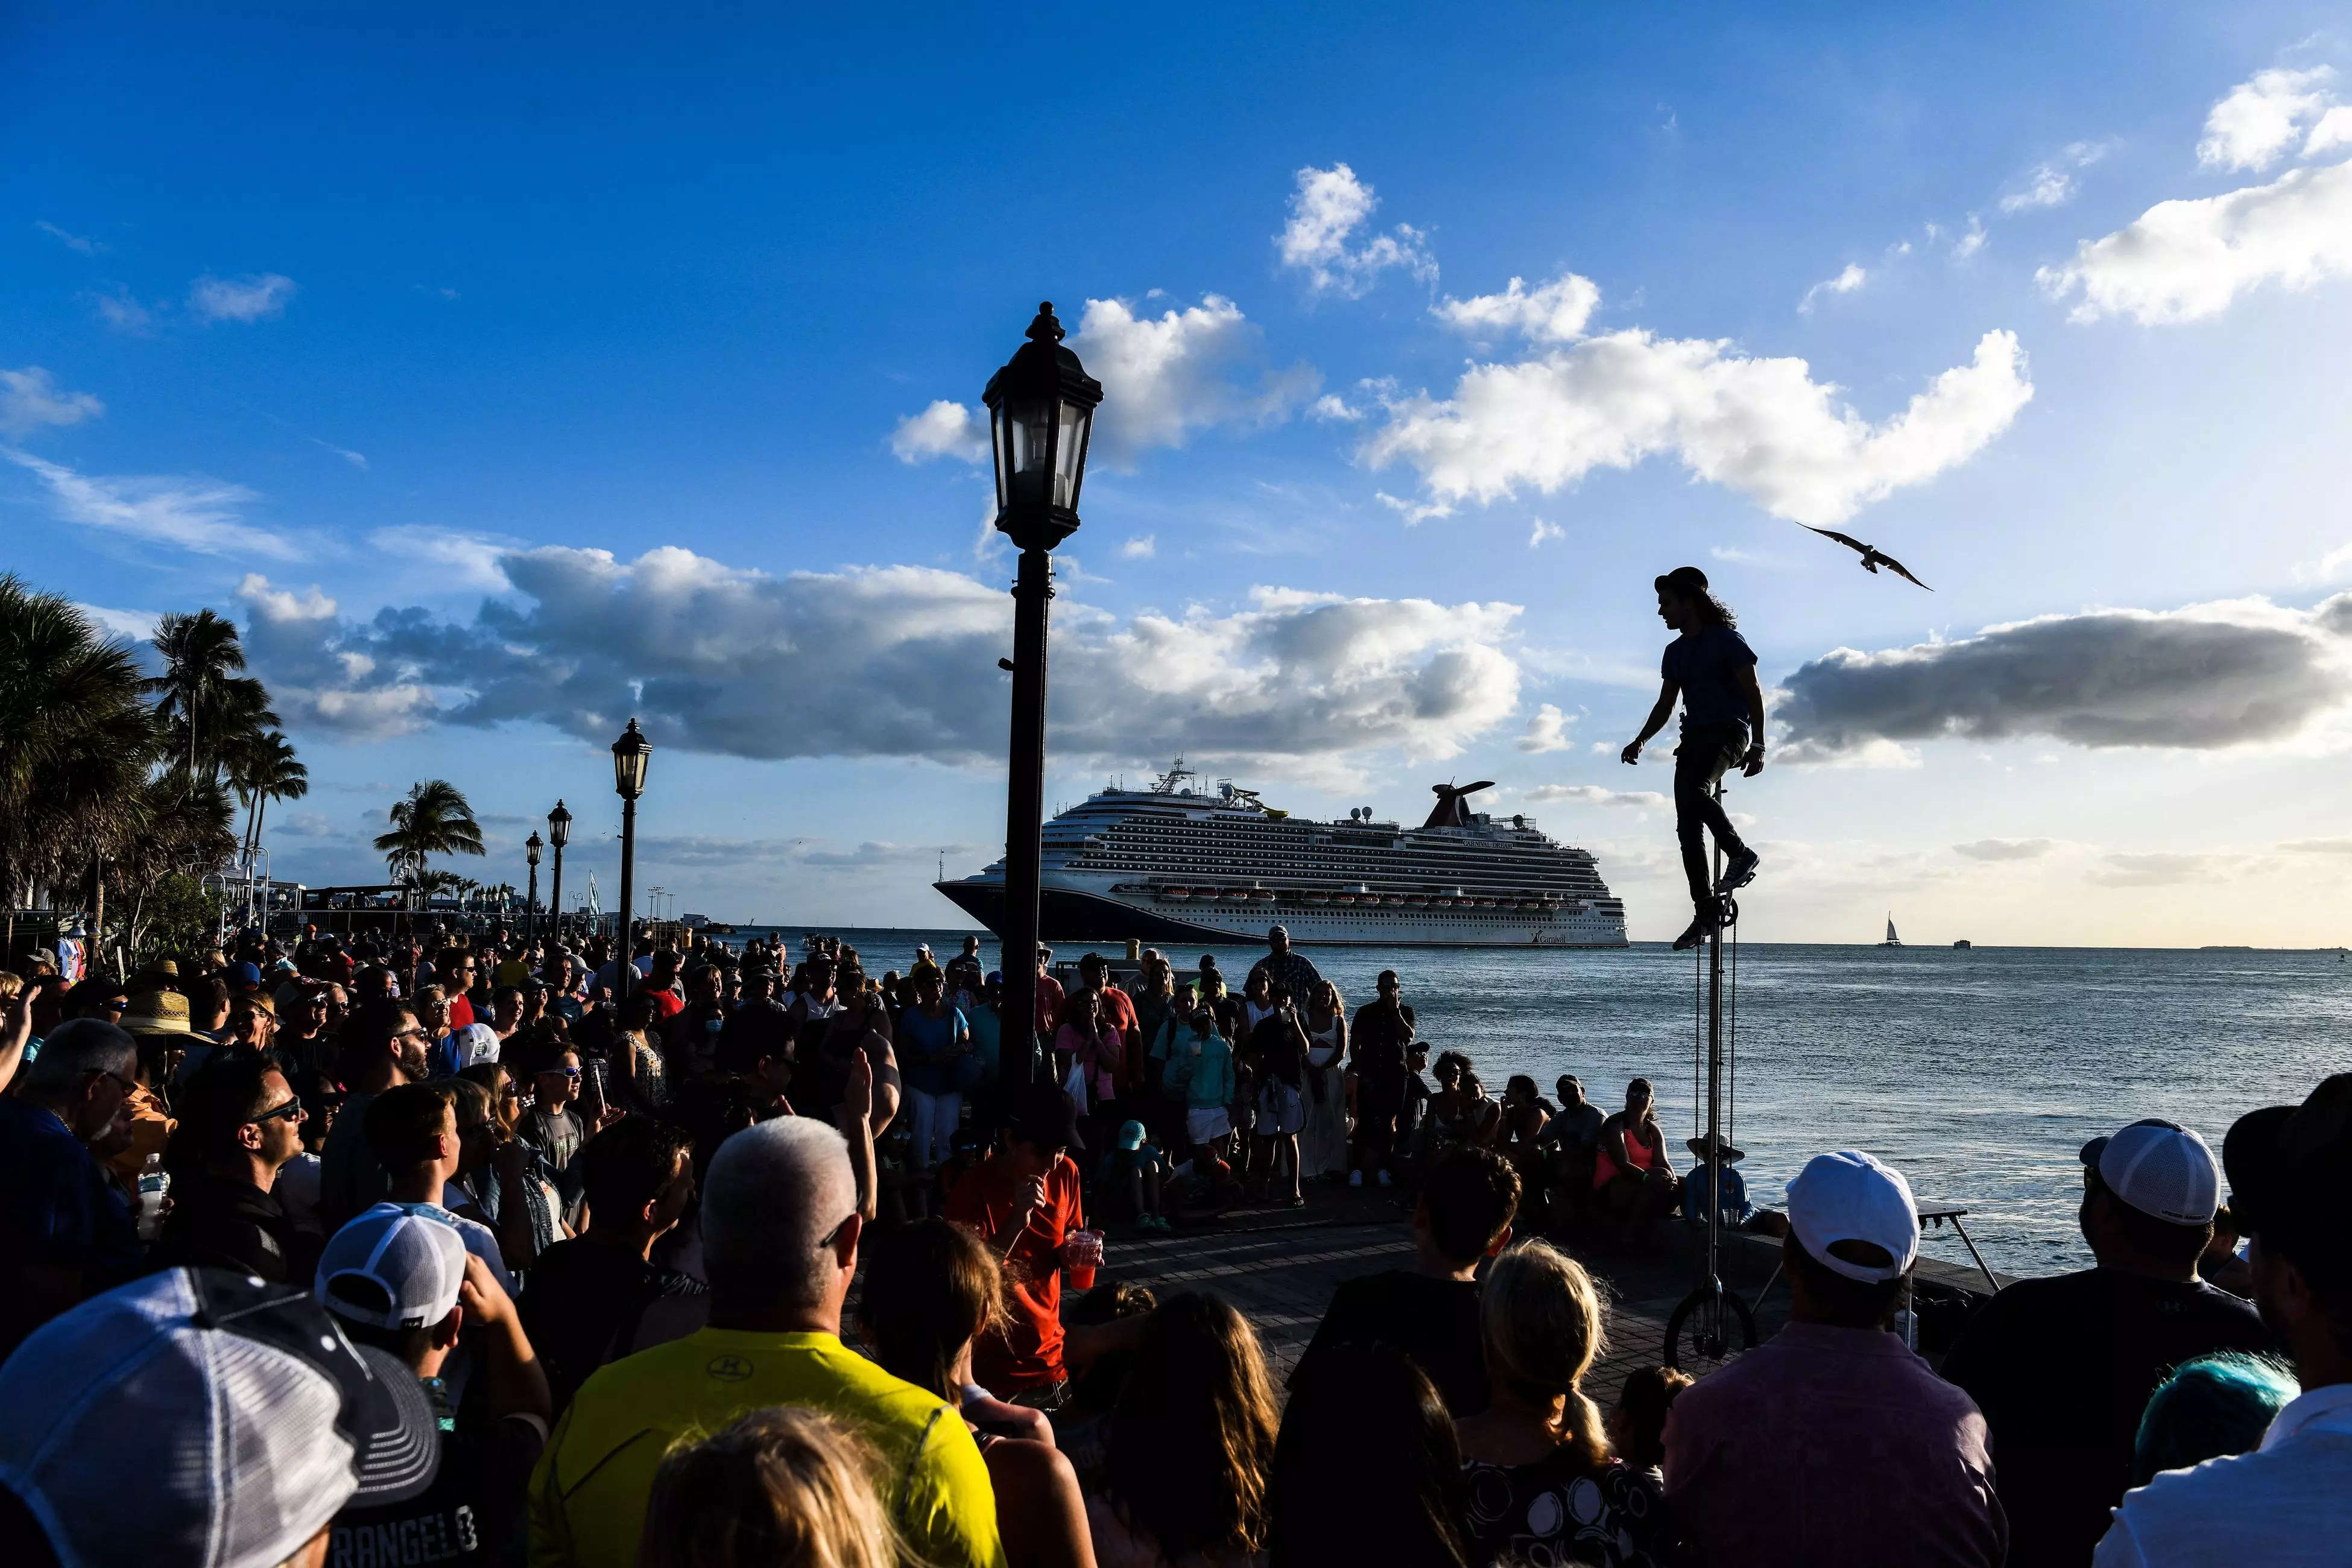 People watch an artist perform as the Carnival Dream cruise ship sails in Key West, Florida, on April 11, 2022